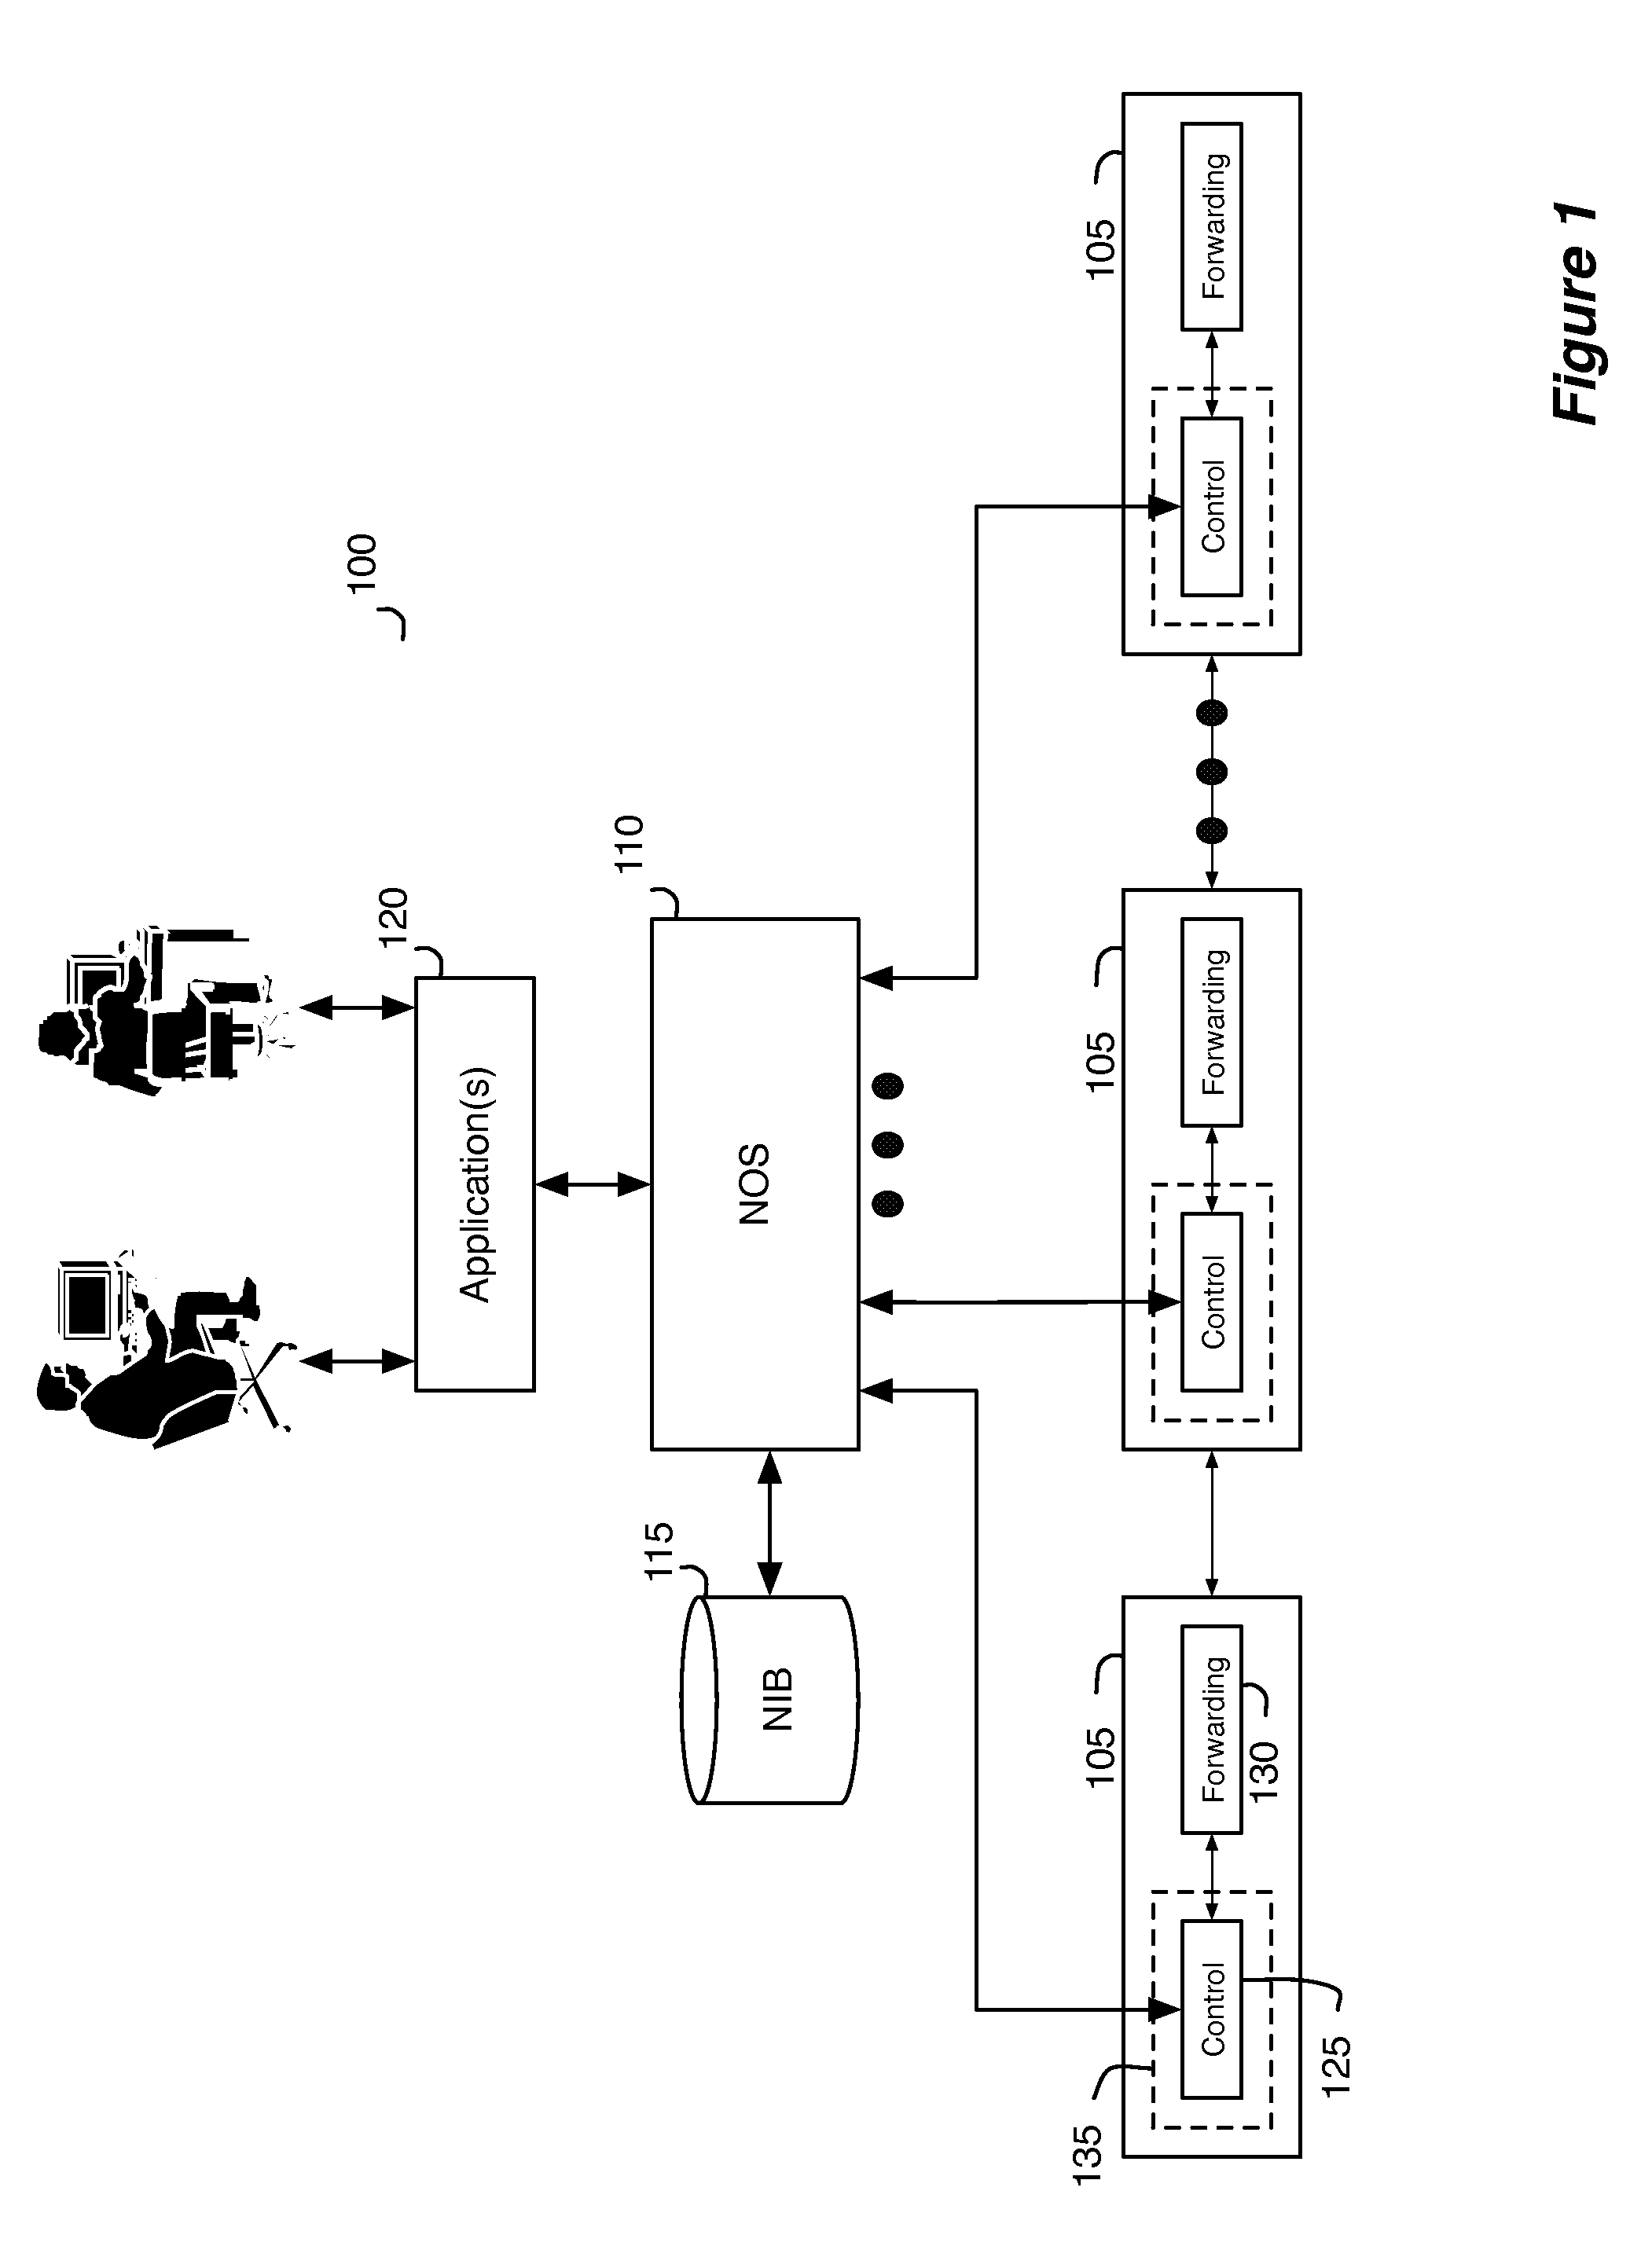 Network control apparatus and method with quality of service controls